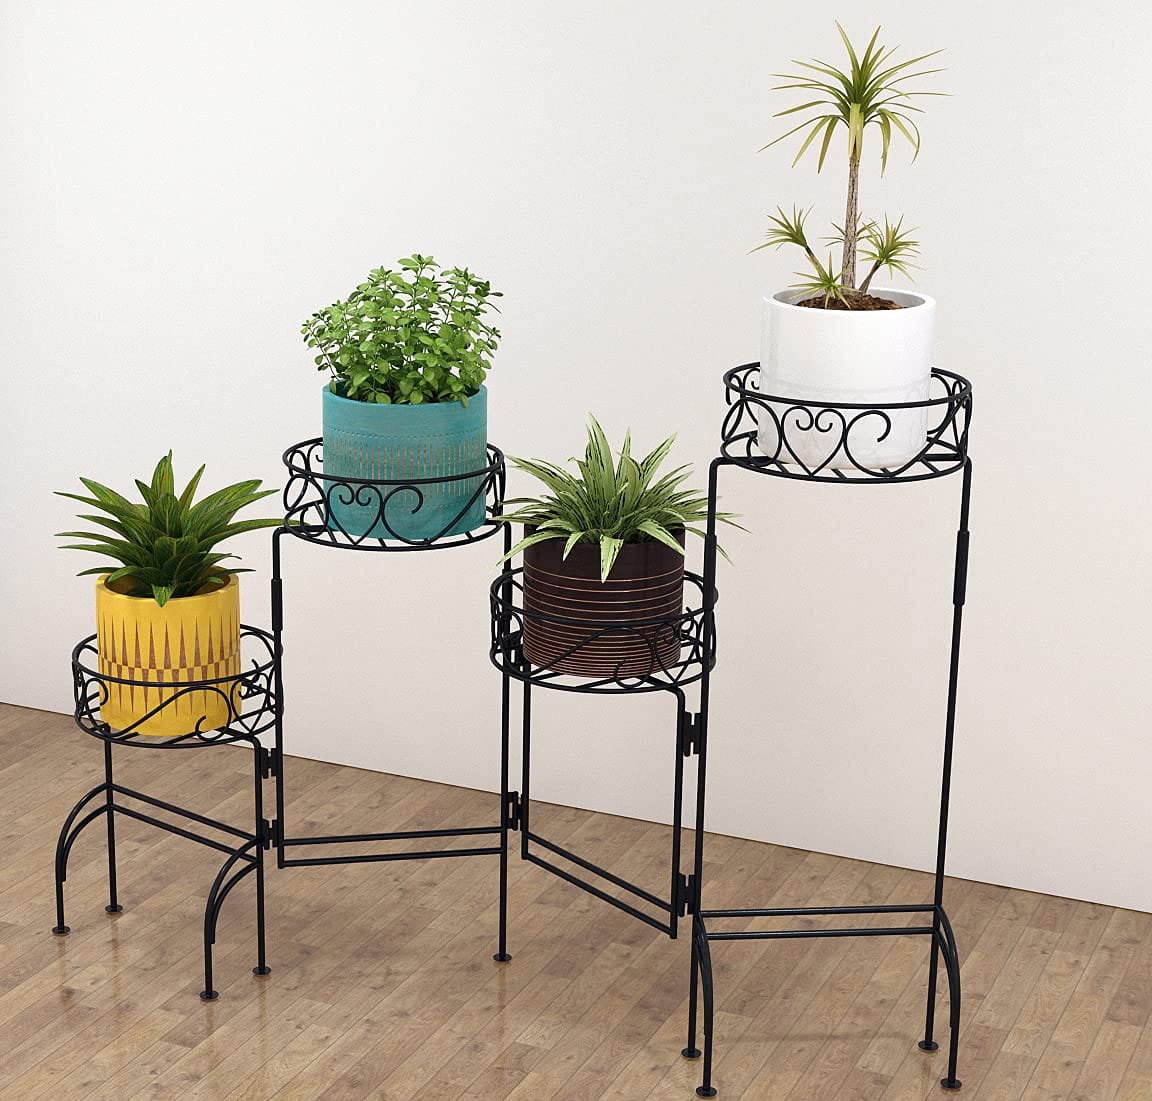 27 in. Tall Metal Potted Holder Rack Flower Pot Stand Heavy Duty Plant  Shelf Rustproof Iron